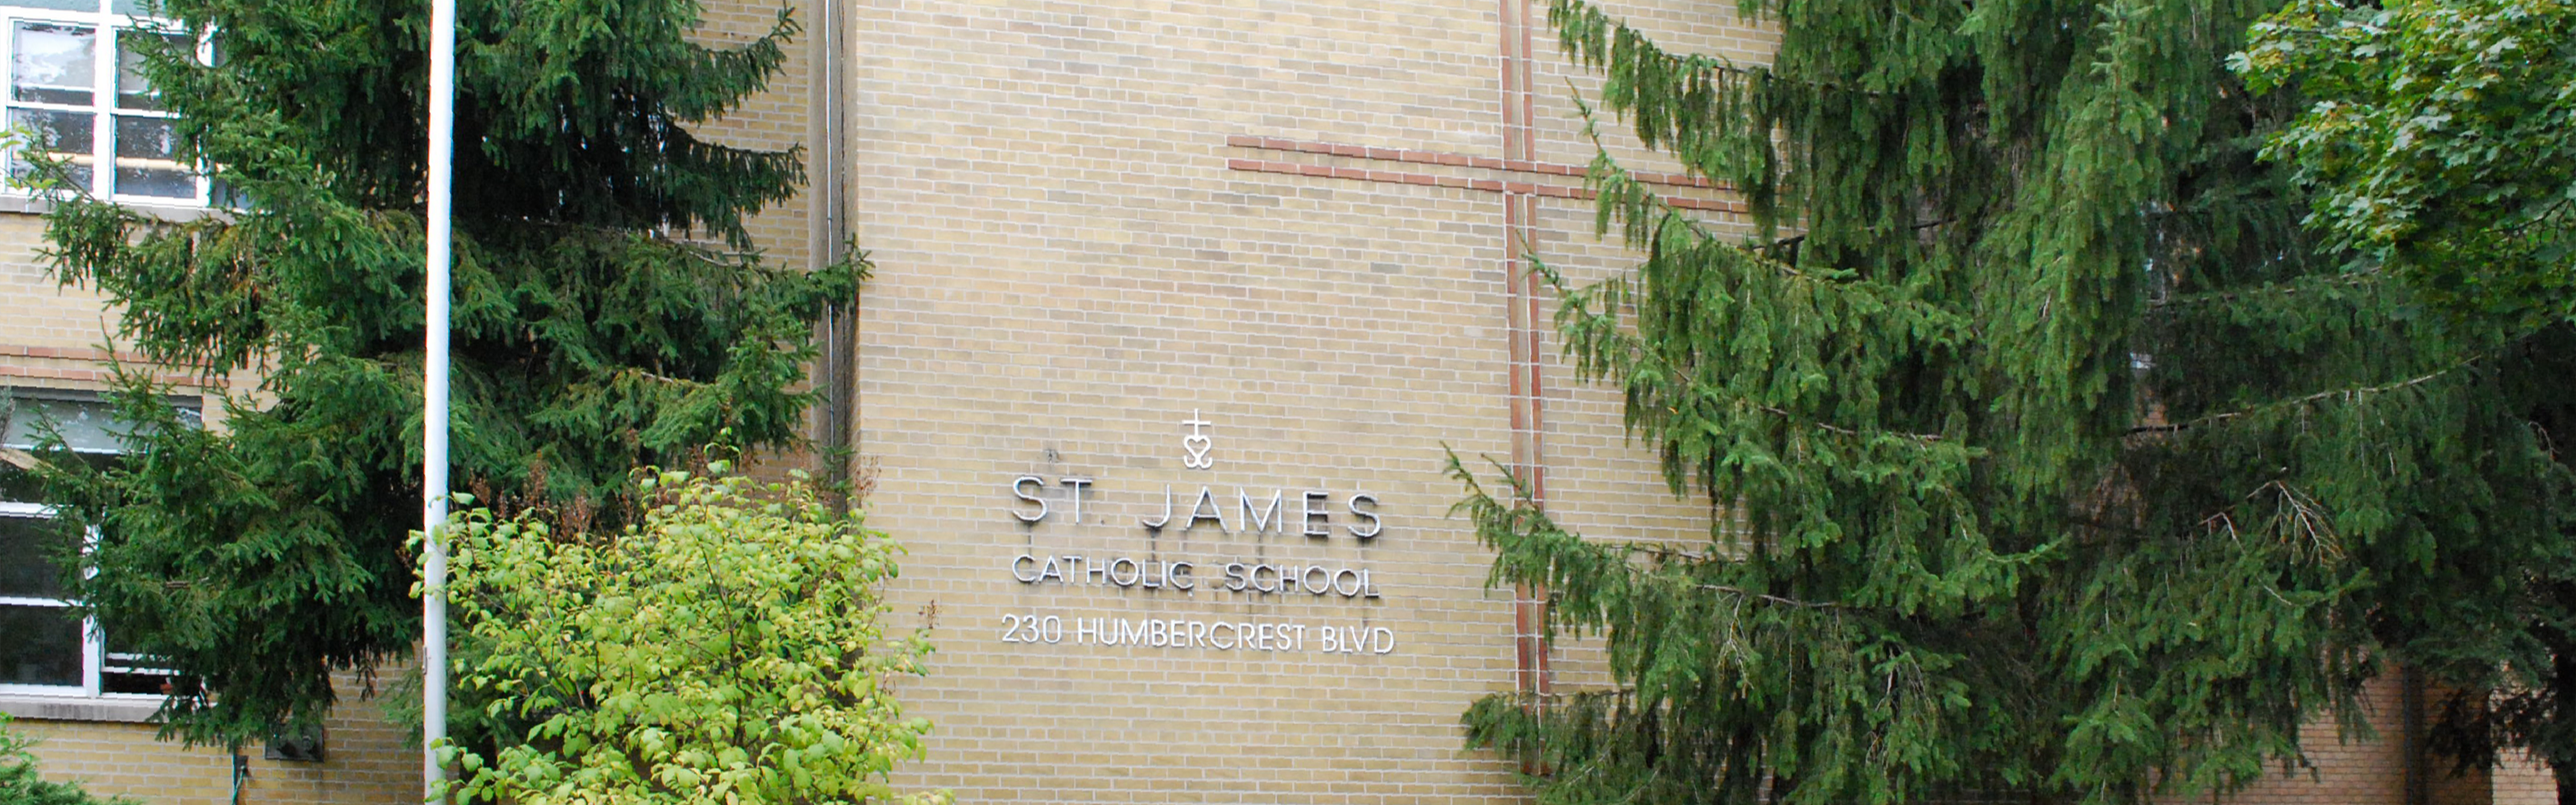 The front of the  St. James Catholic School building.